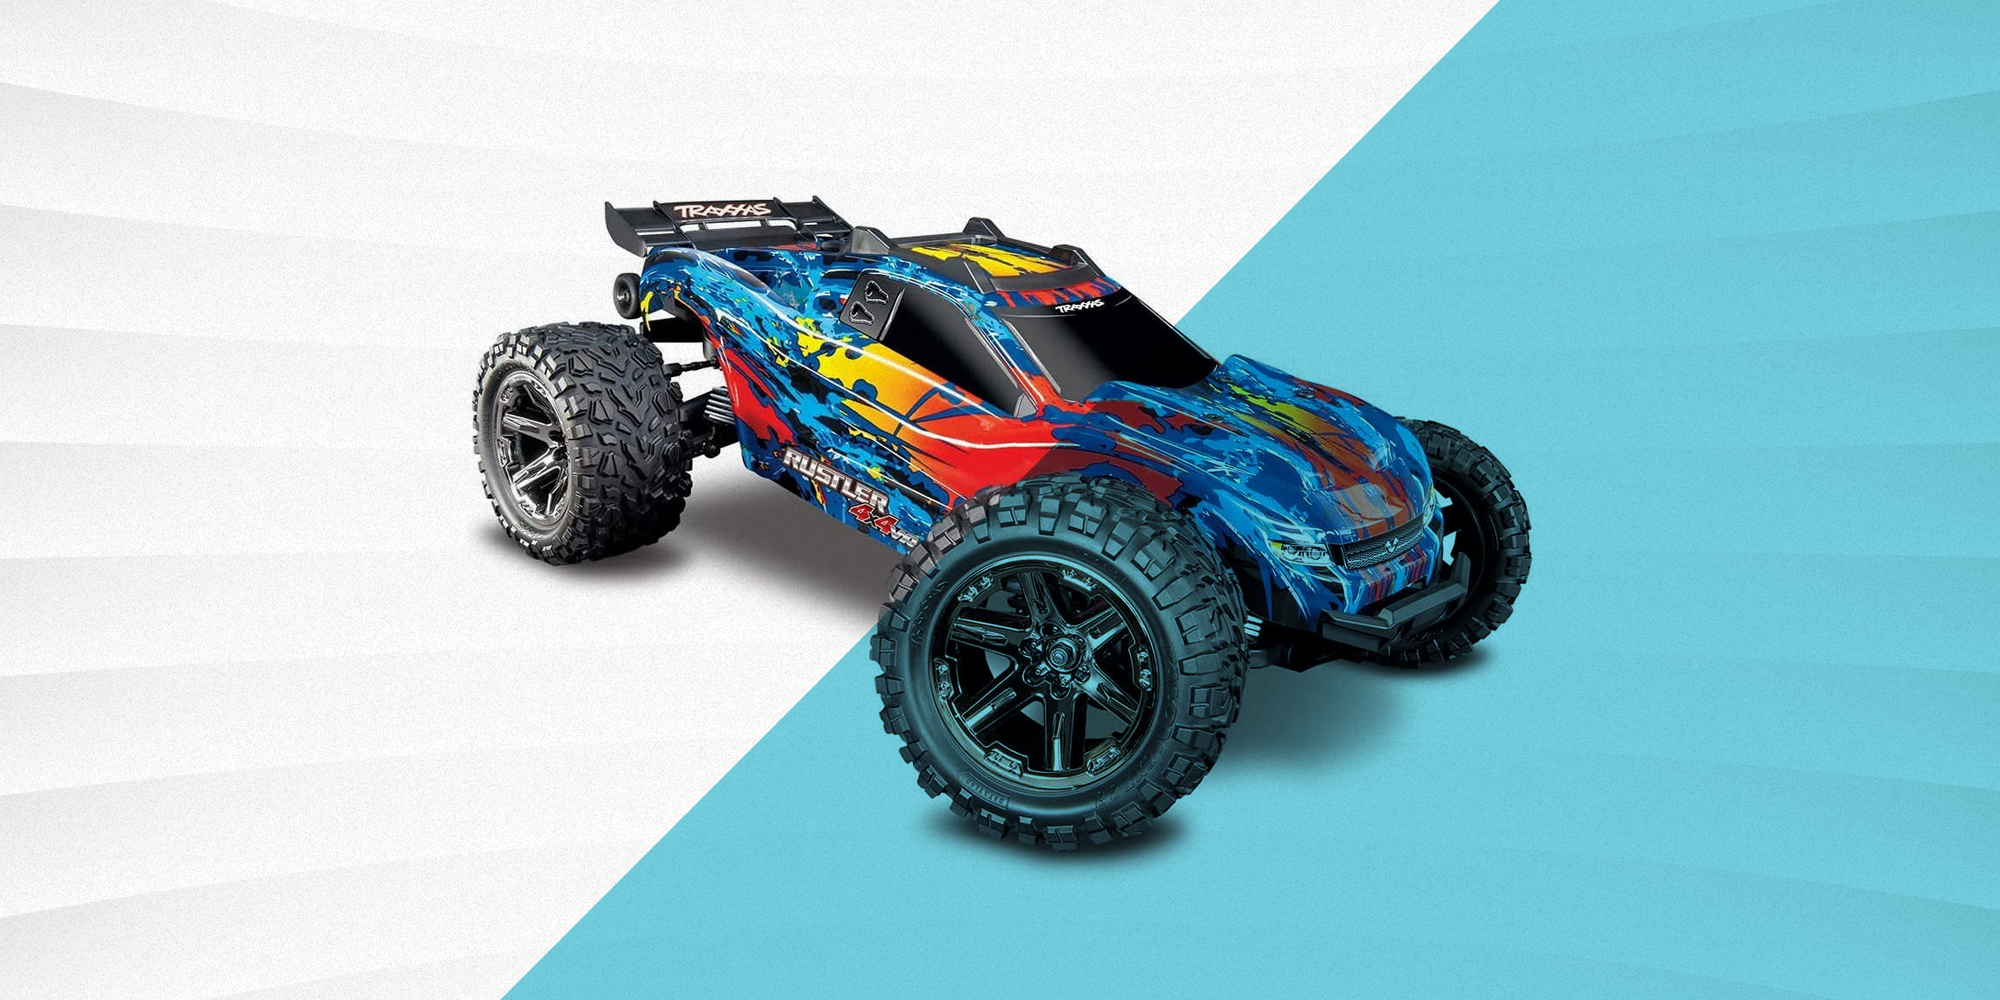 Oportuno Acorazado lealtad The 11 Best Remote Control Cars - RC Cars for Kids and Adults